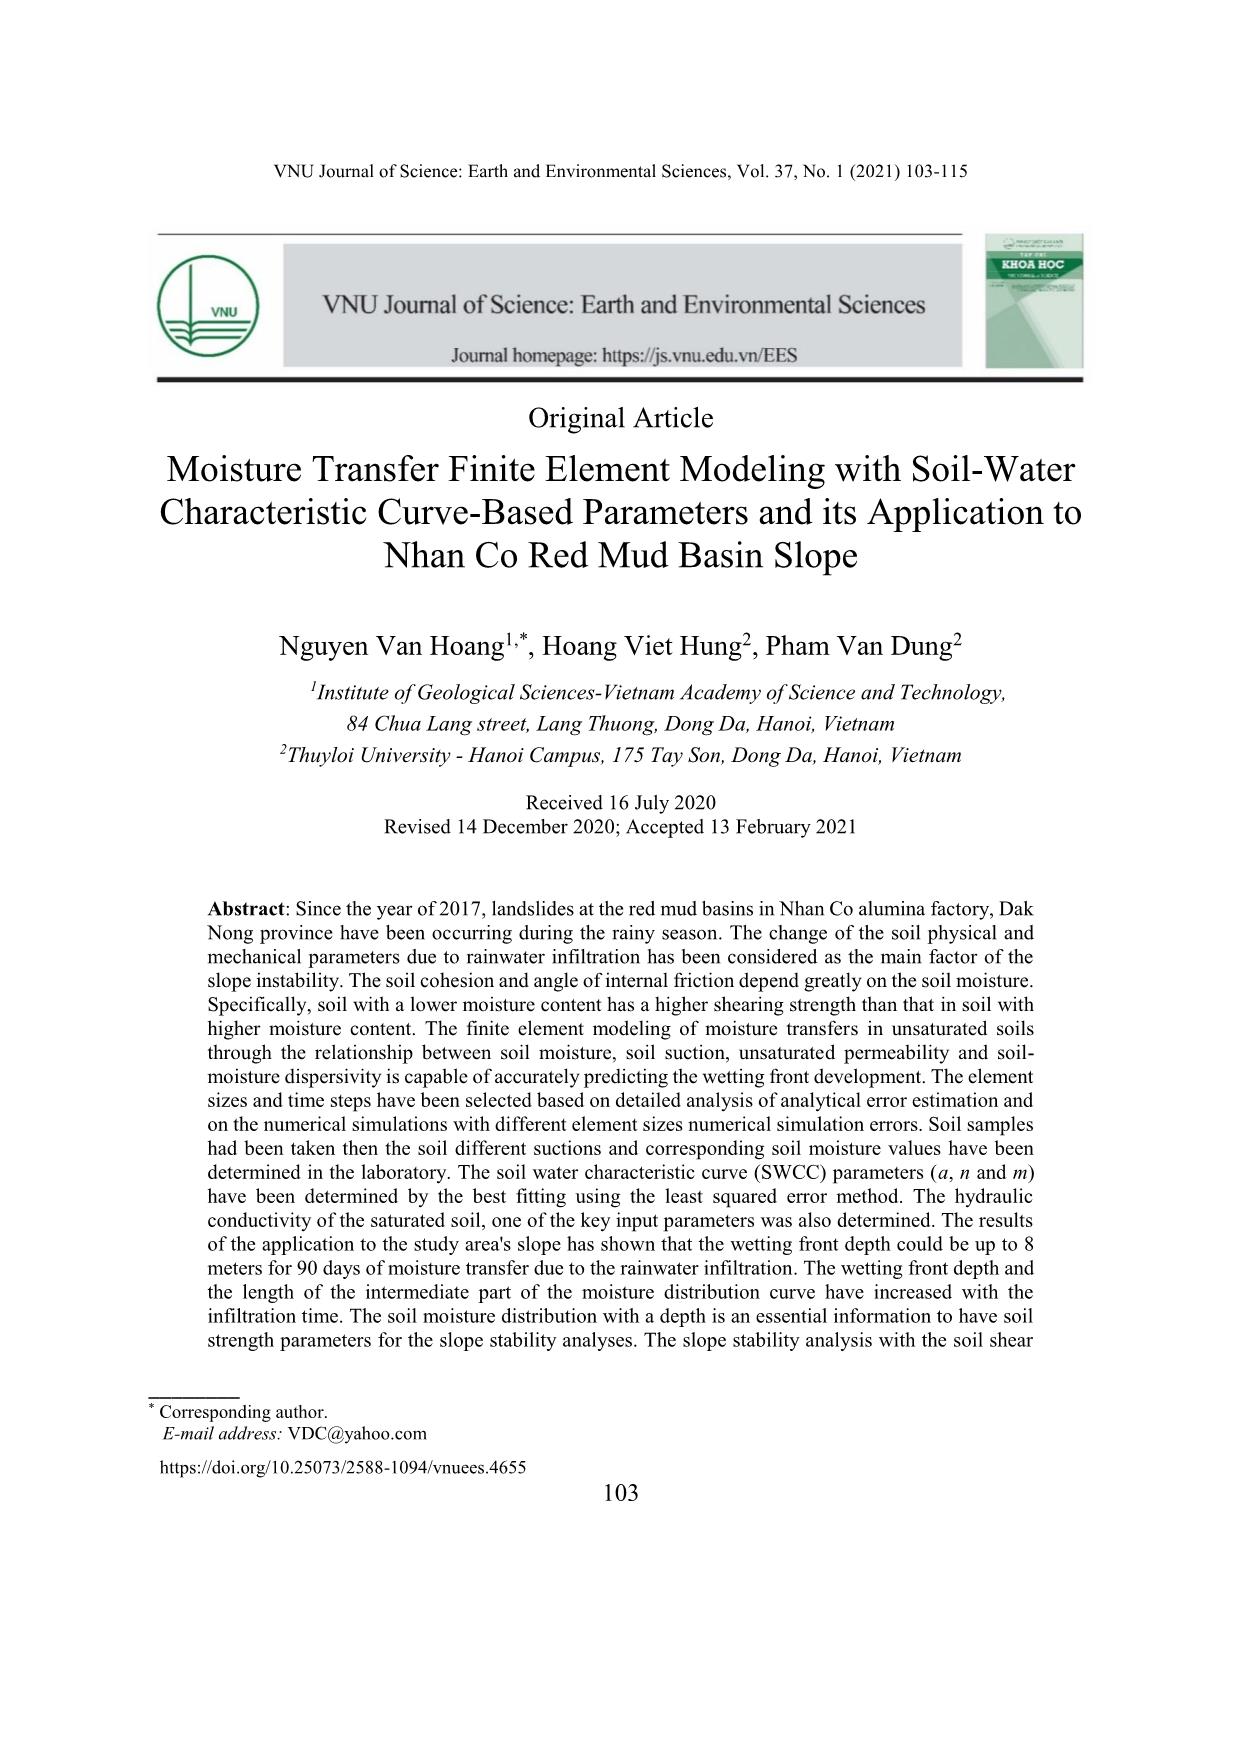 Moisture Transfer Finite Element Modeling with Soil-Water Characteristic Curve-Based Parameters and its Application to Nhan Co Red Mud Basin Slope trang 1